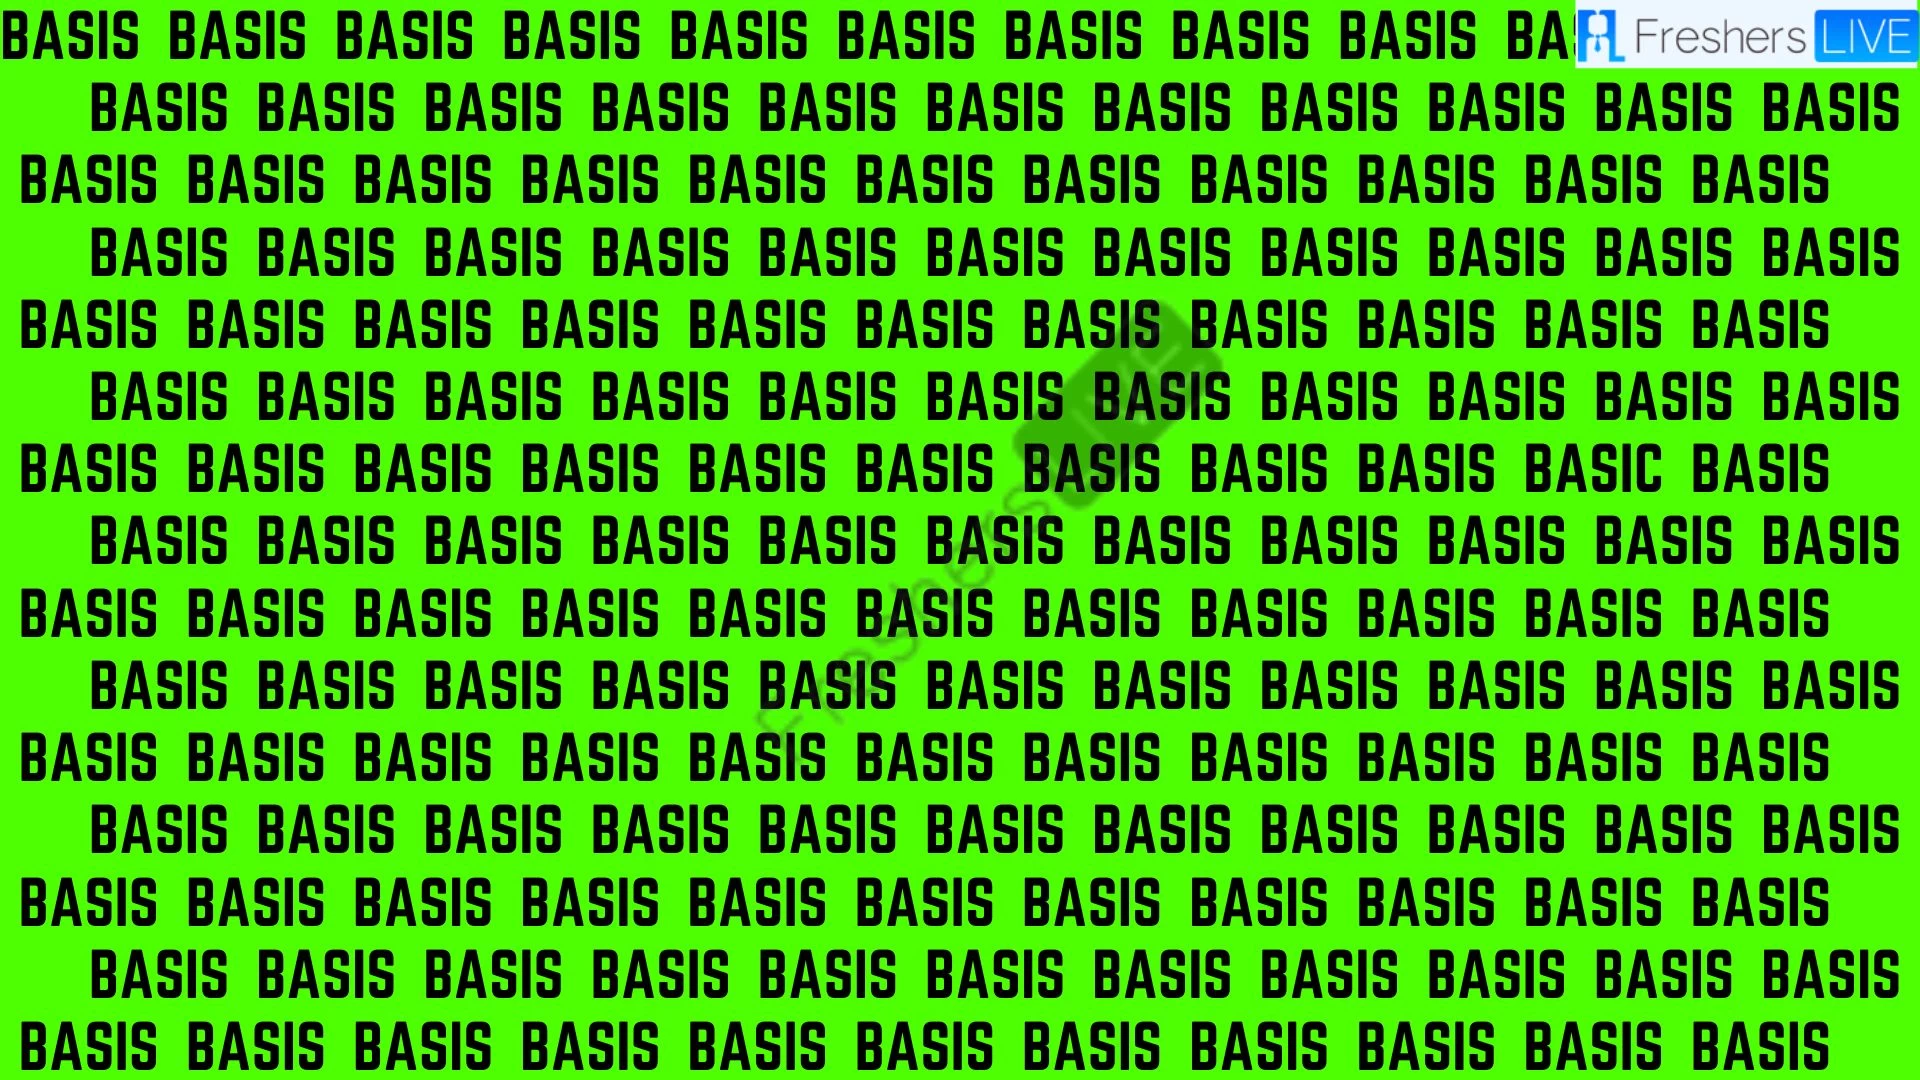 Only people with the IQ Can Find the Basic Word between Basic in Just 10 Seconds